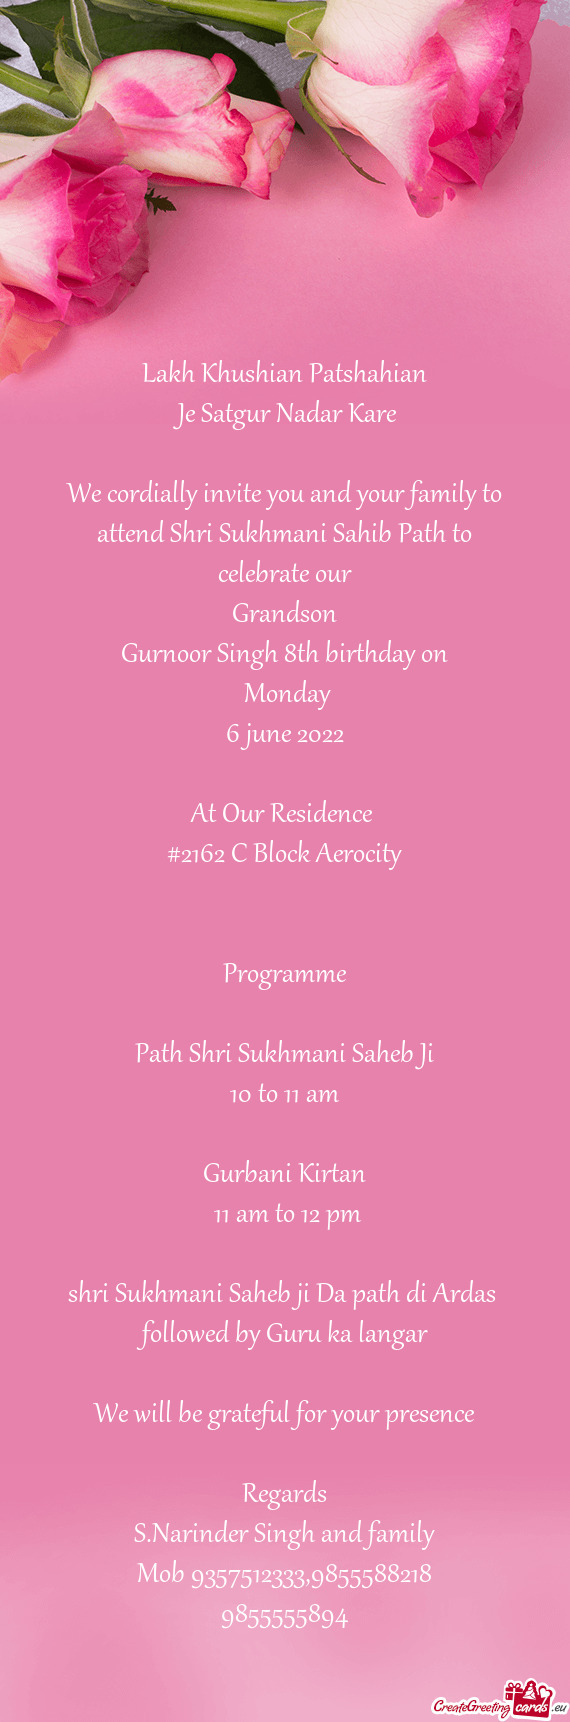 We cordially invite you and your family to attend Shri Sukhmani Sahib Path to celebrate our